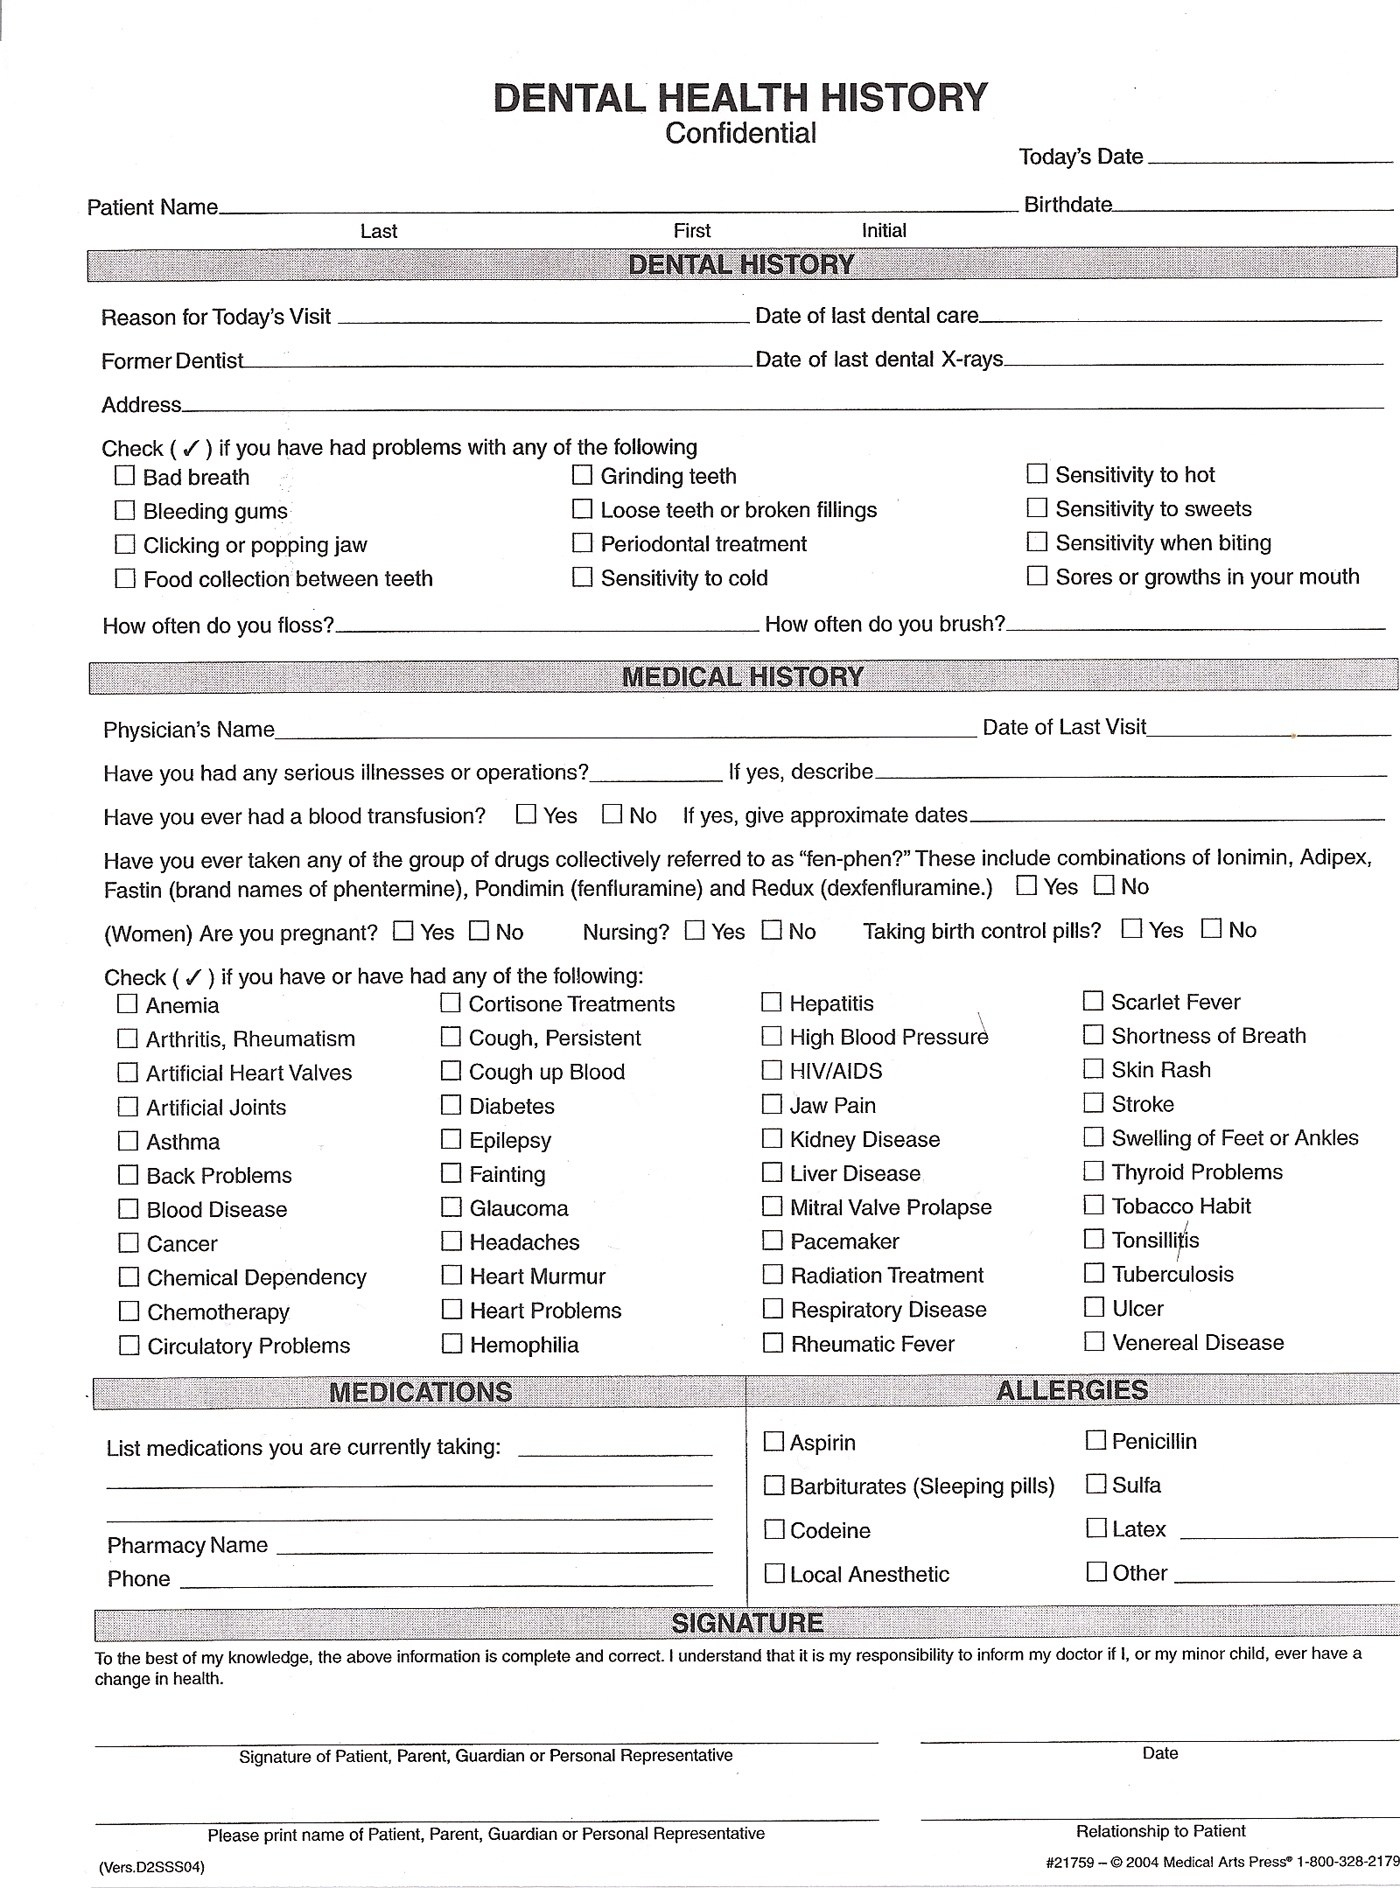 Personal Medical History Template